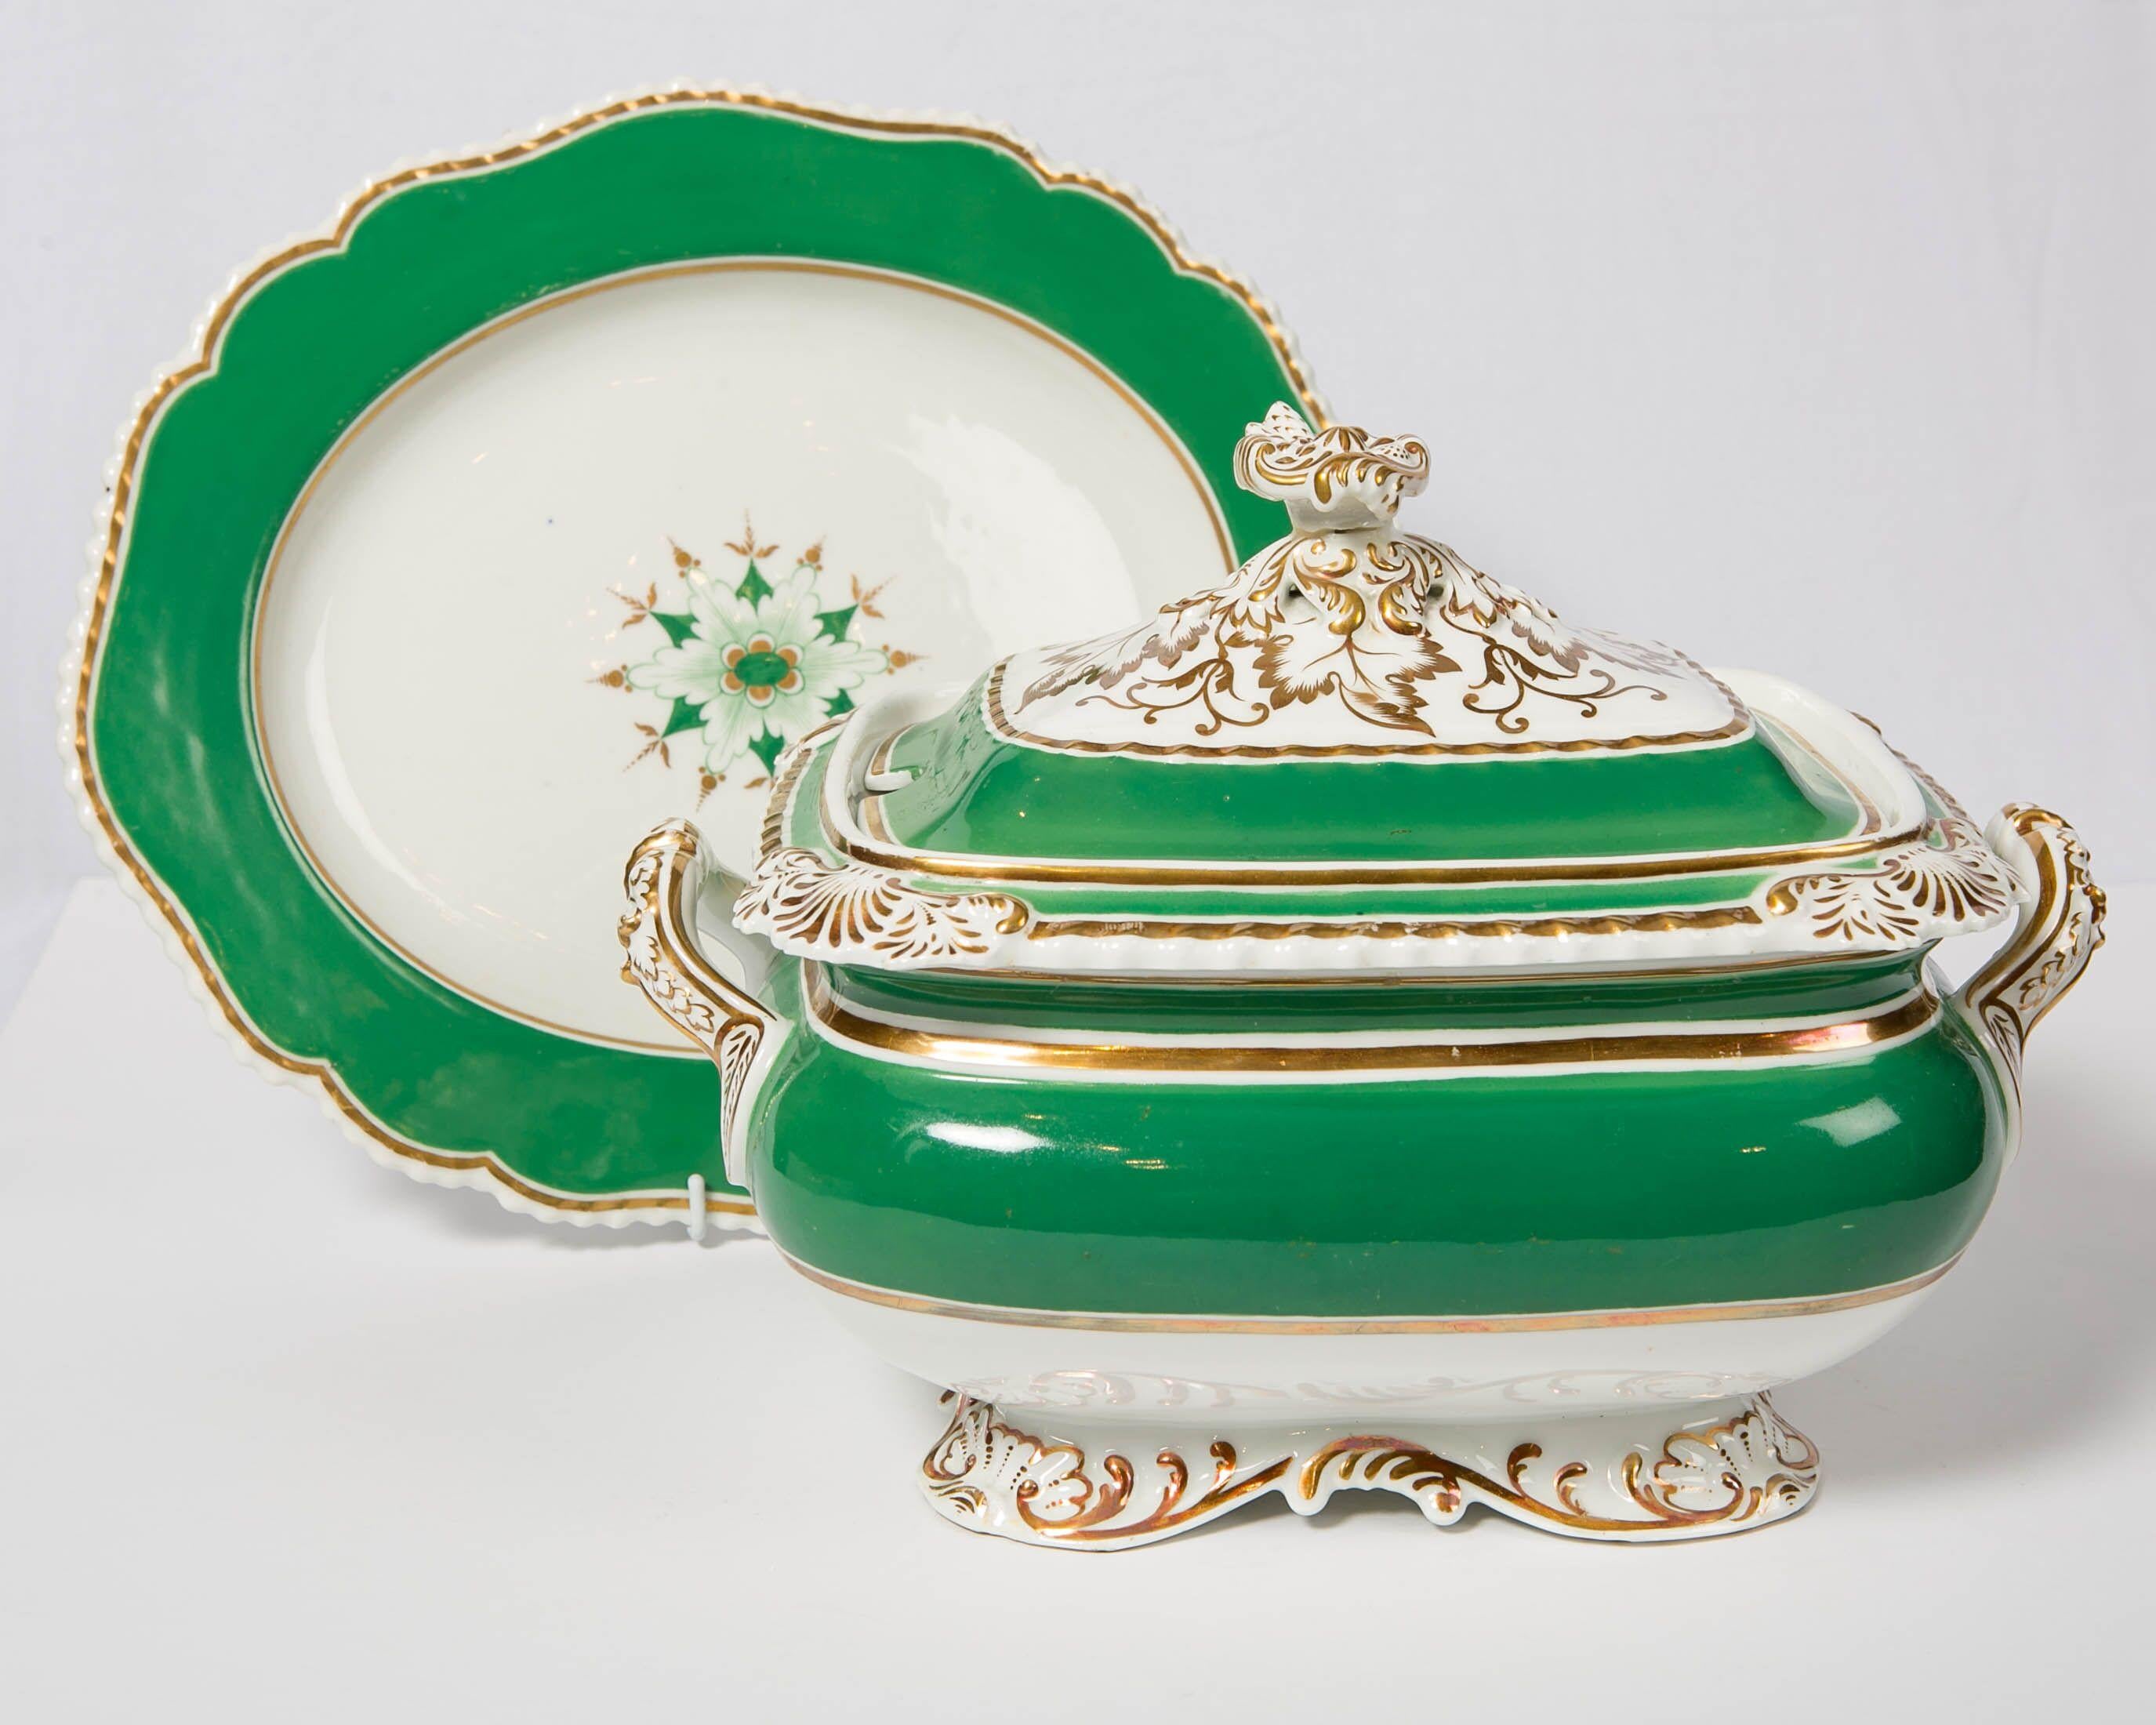 Why we love it: The intense green
We are proud to offer this Chamberlains Worcester Soup Tureen made in England, circa 1825. It is painted with broad bands of intense green. The details of the tureen are superb. The top edge is gadrooned, the